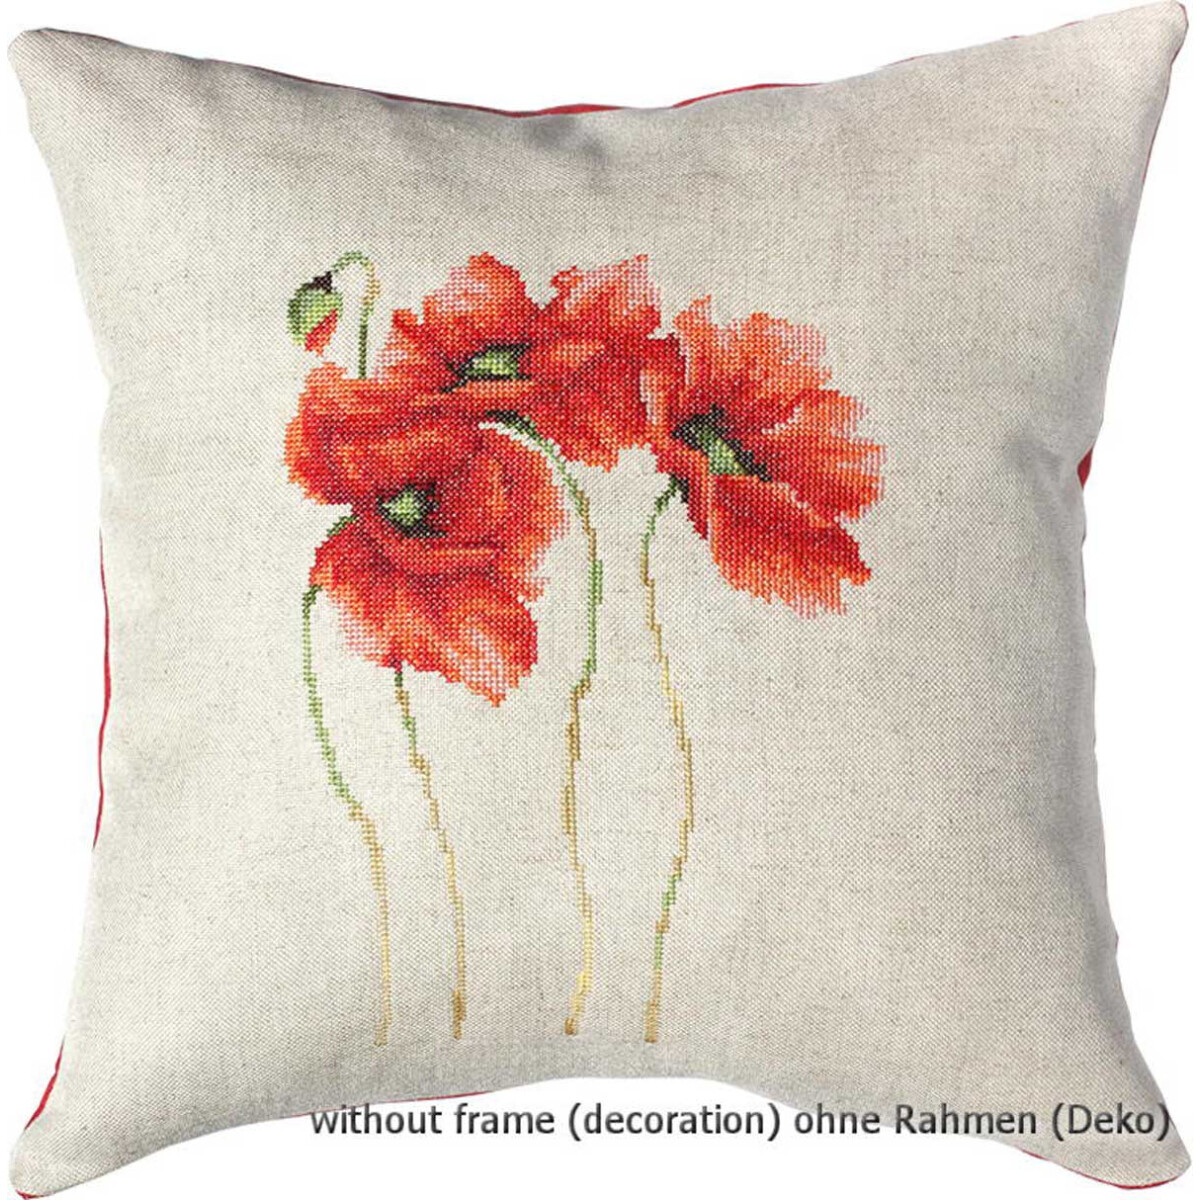 A beige cushion with an embroidered pattern of three red...